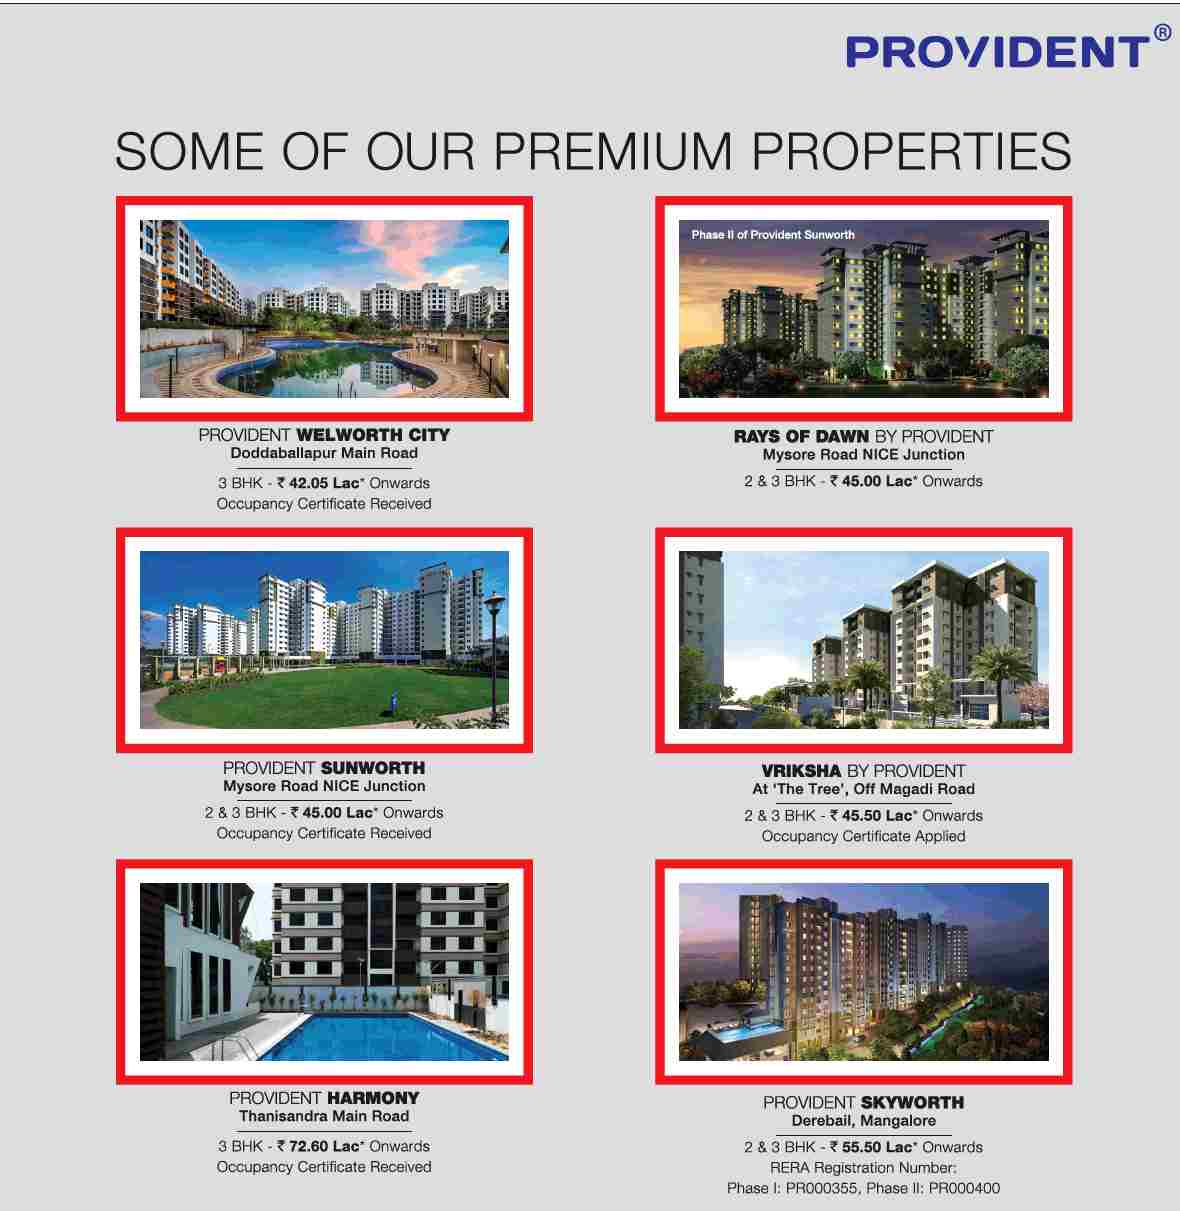 Experience a joyful life at Provident properties in Bangalore